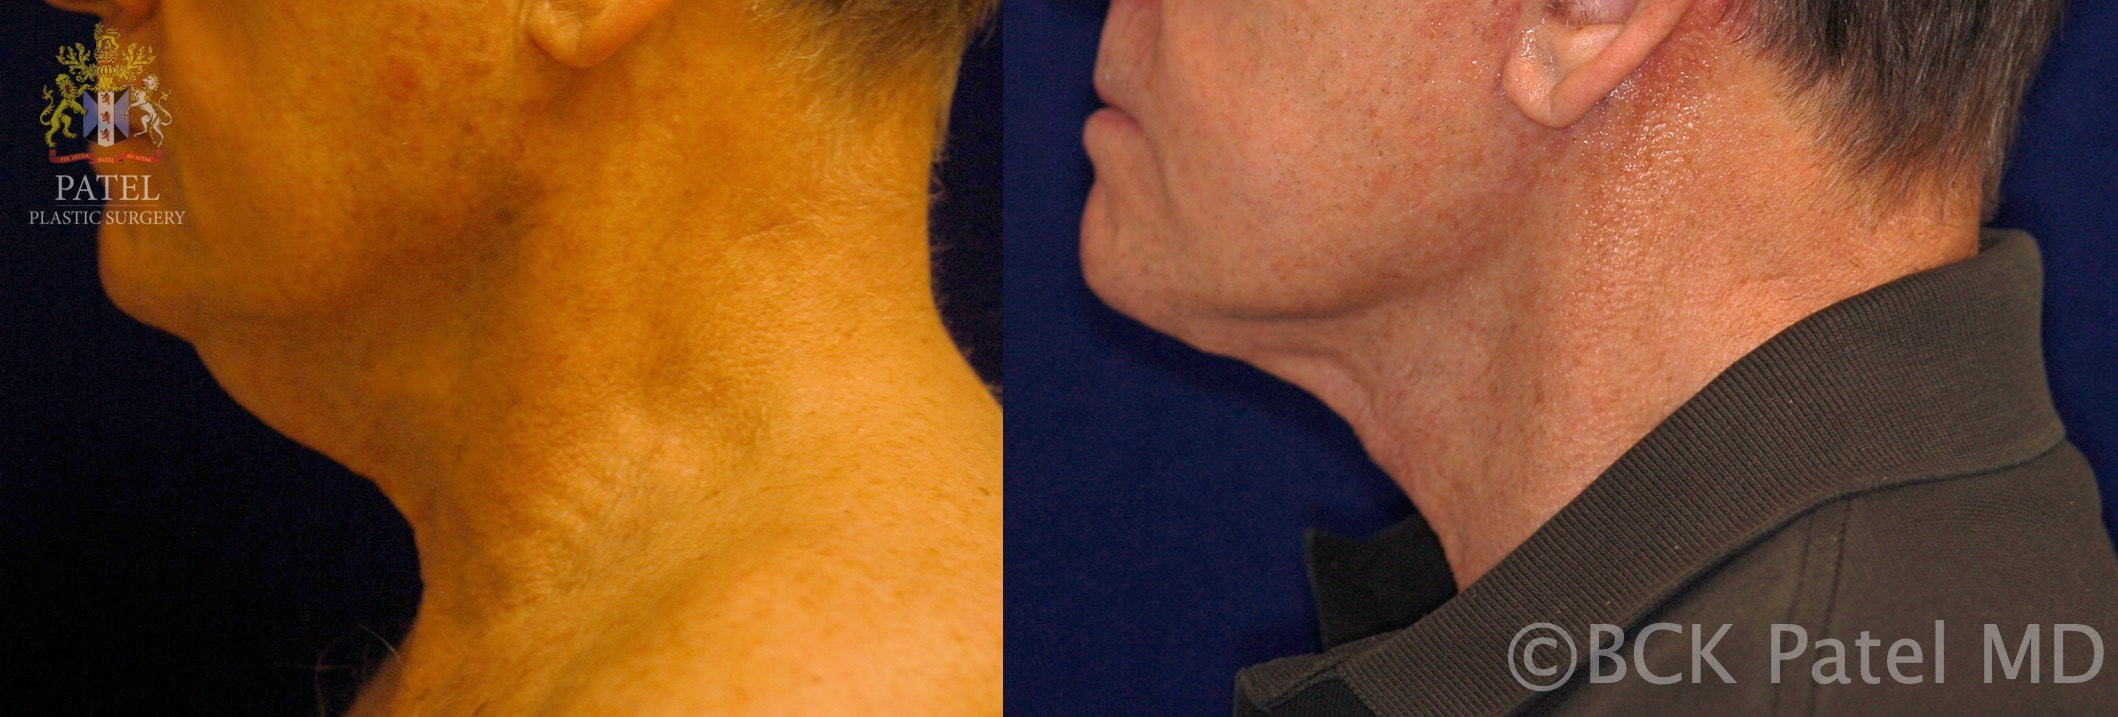 Facelift and necklift by Dr. BCK Patel MD, FRCS